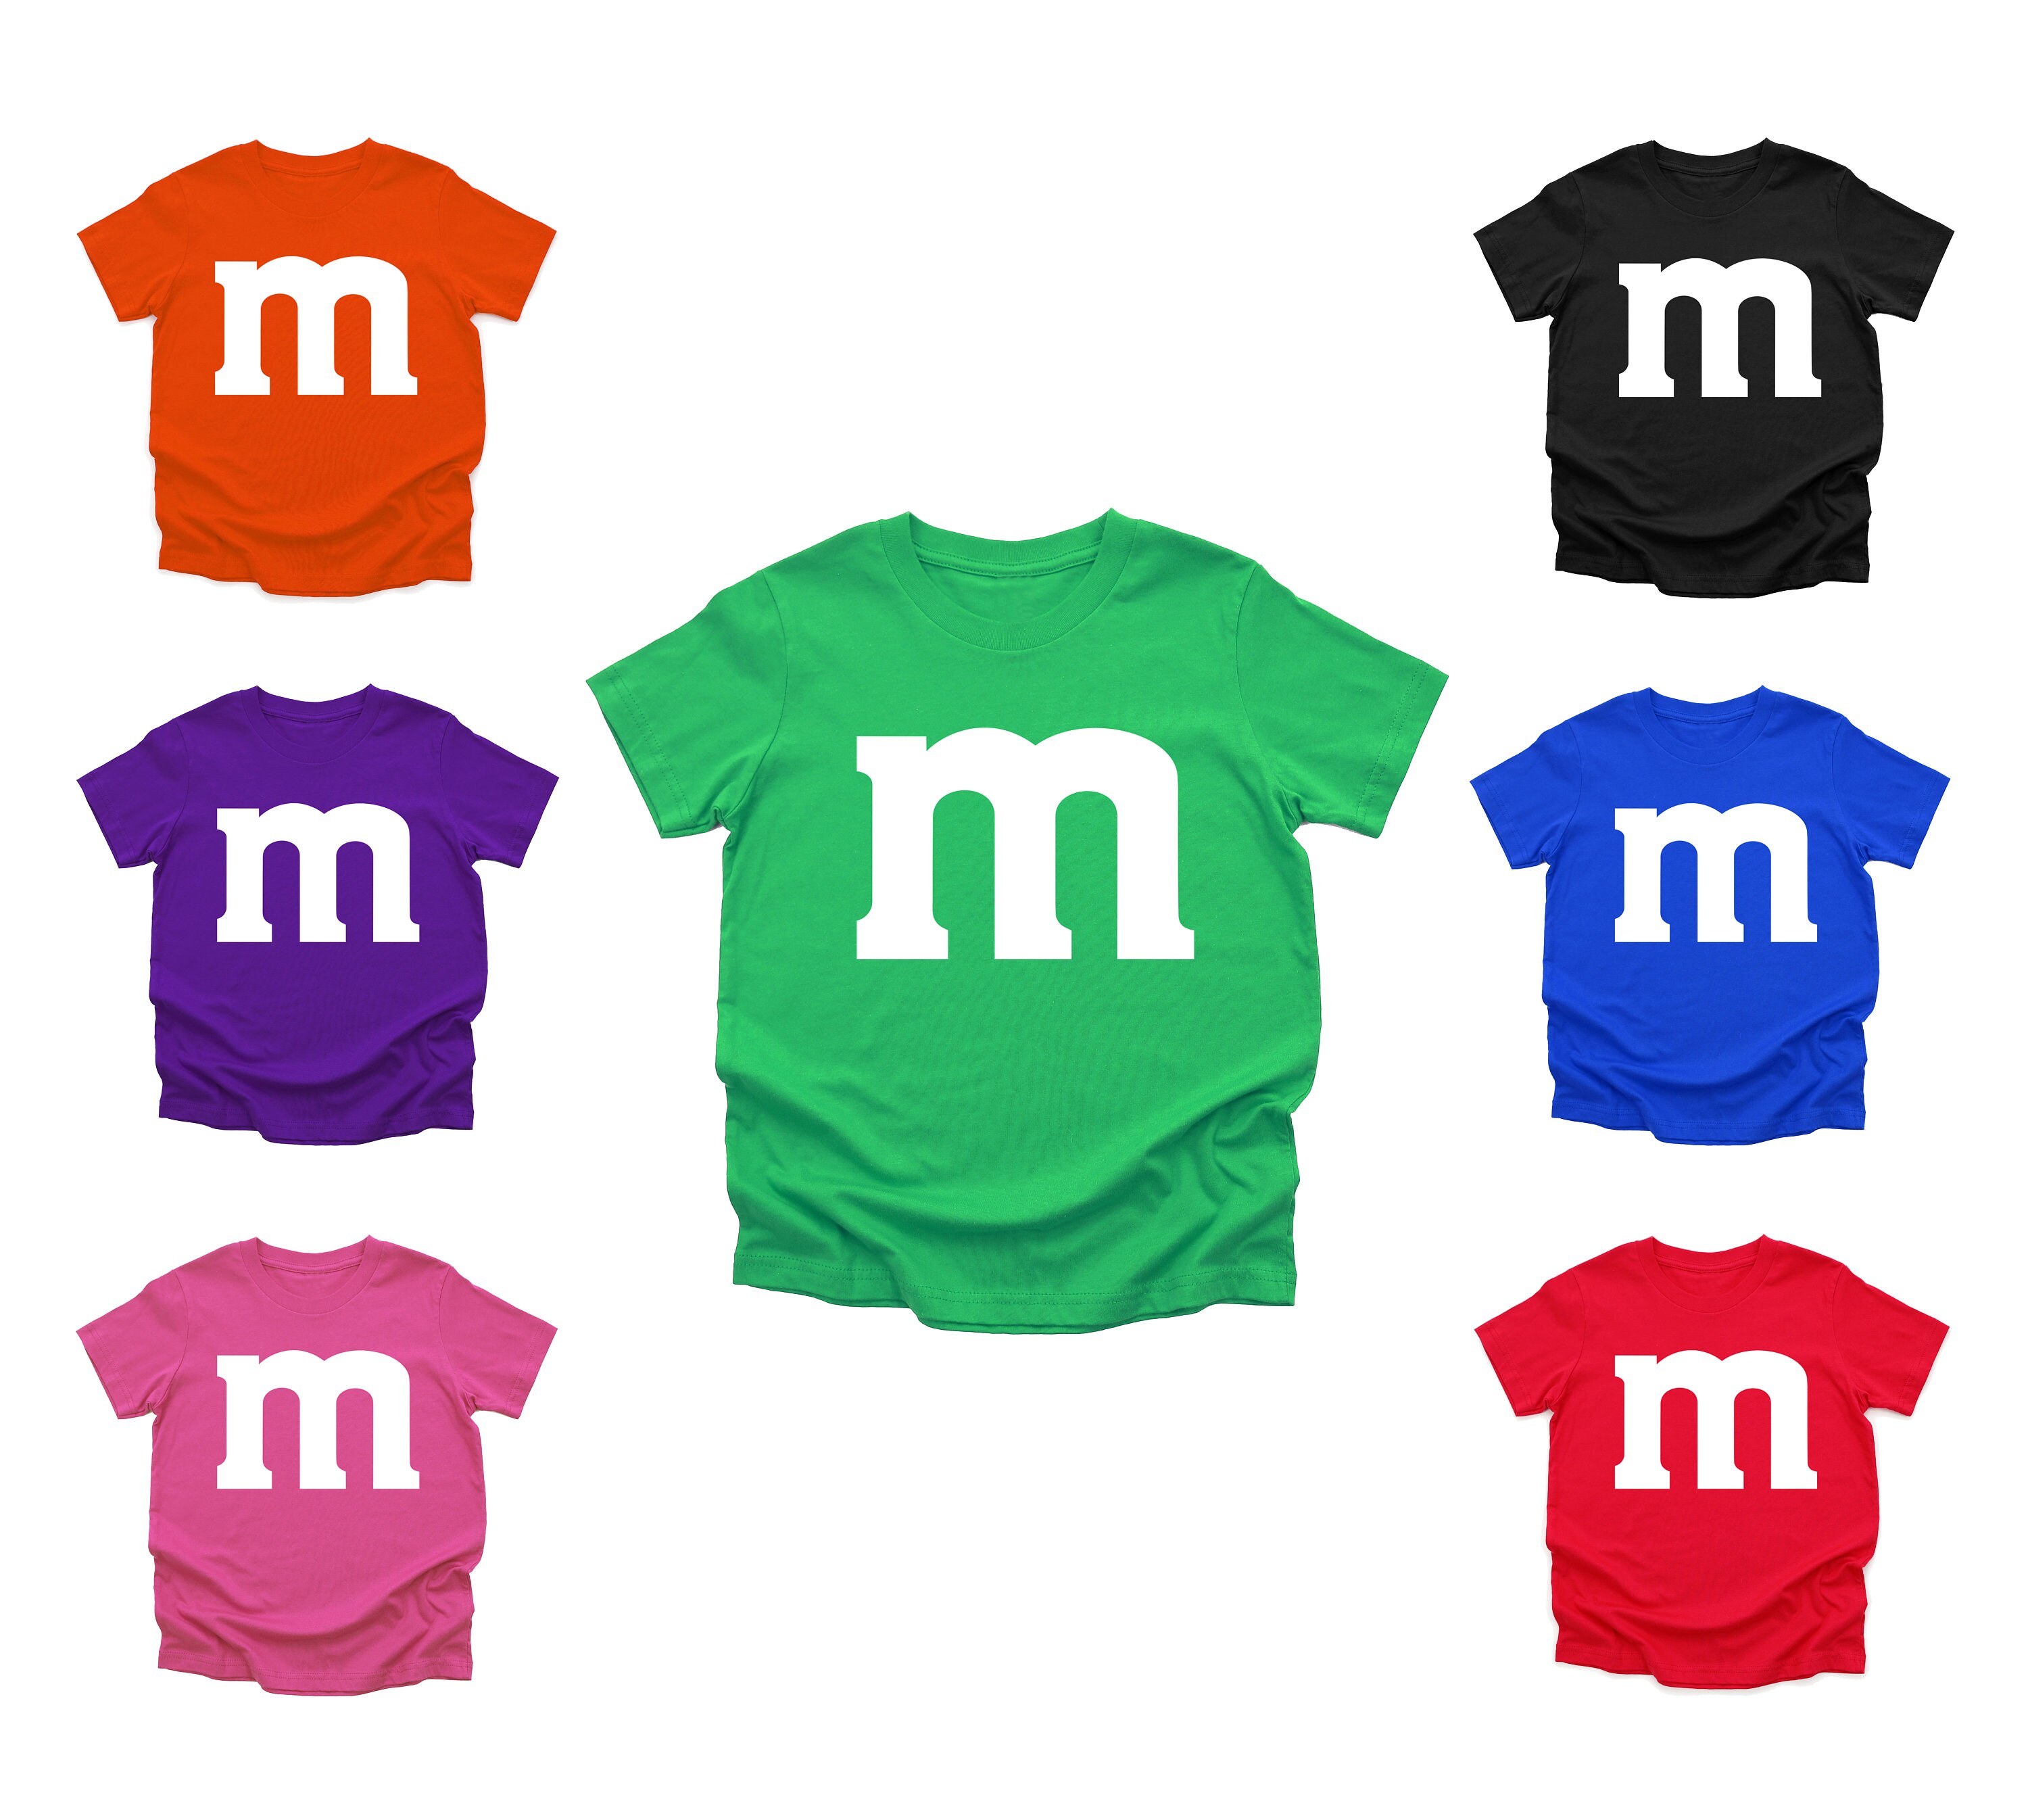  M&M Family Shirts - personalized group costumes, halloween  shirts for adults, matching halloween costumes for family, custom party  shirts, m&m shirt : Handmade Products